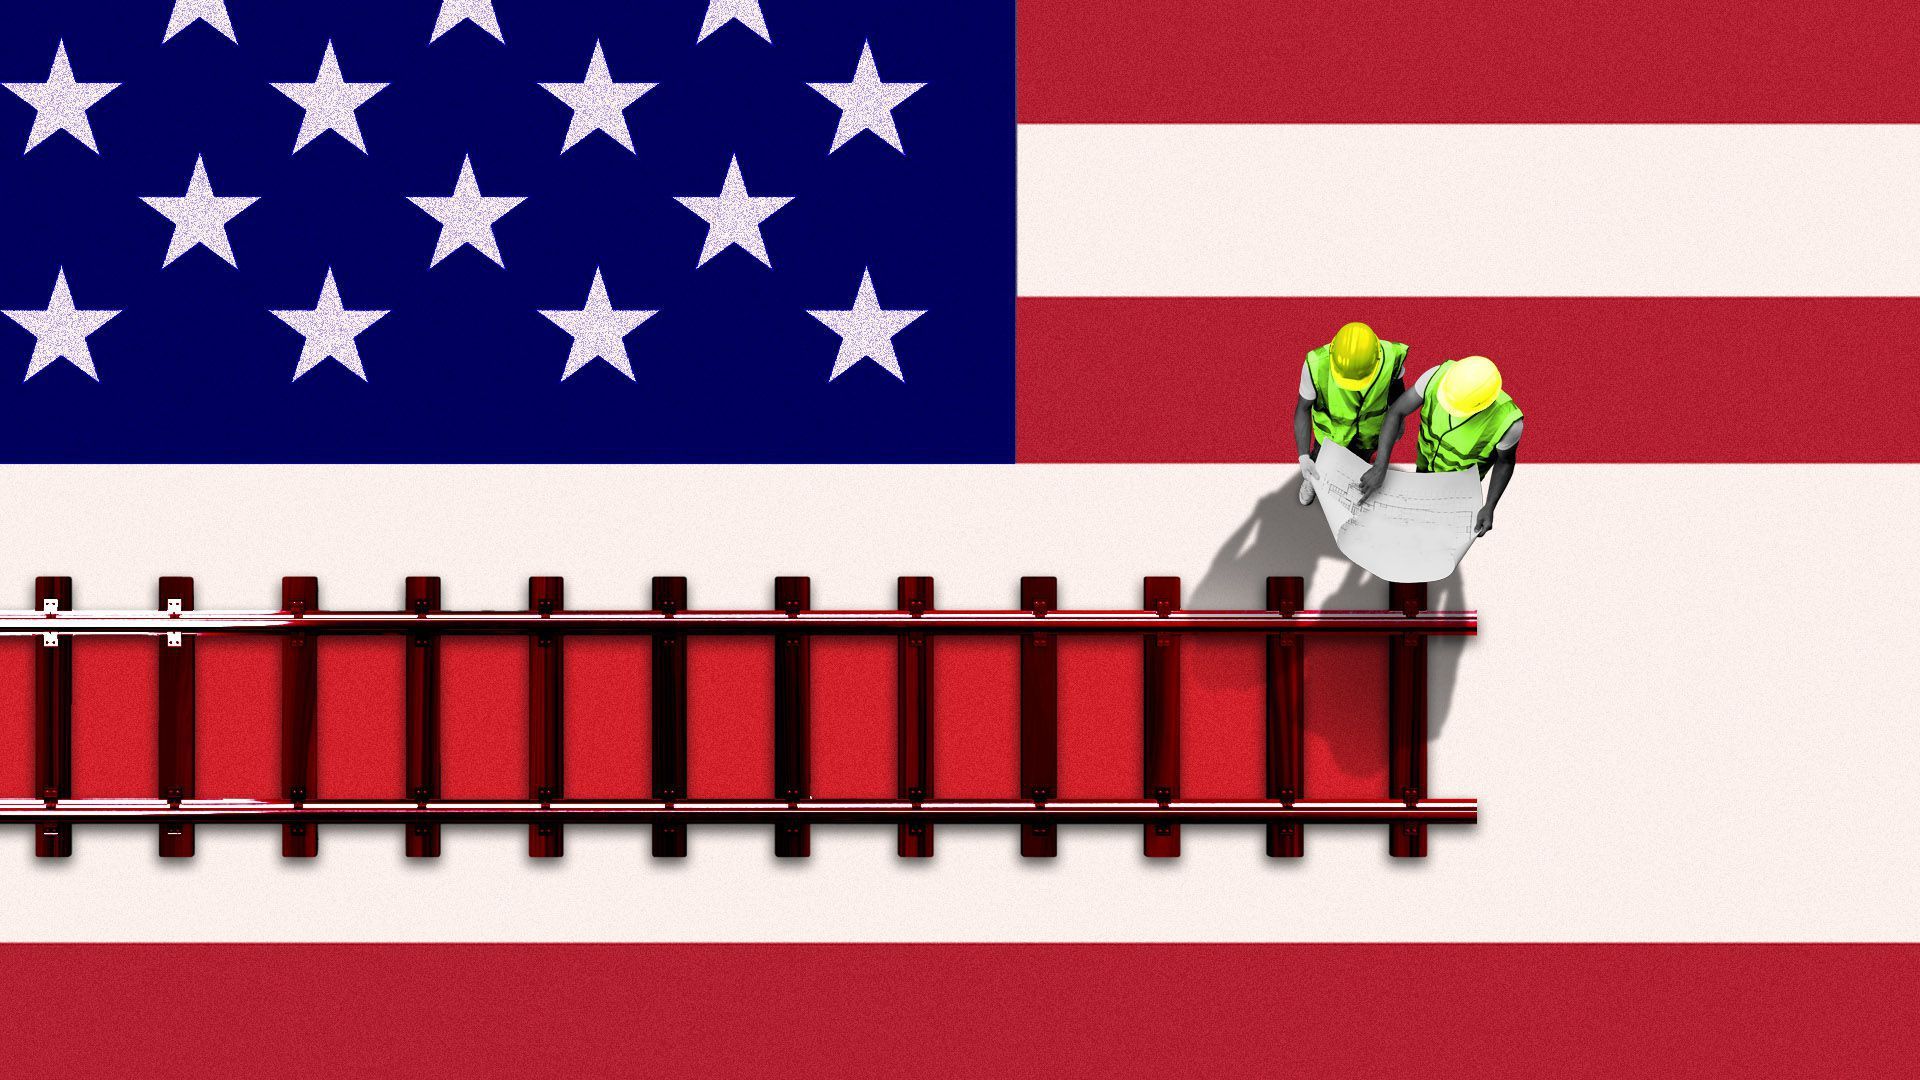 Illustration of workers laying railroad track across an image of an American flag.